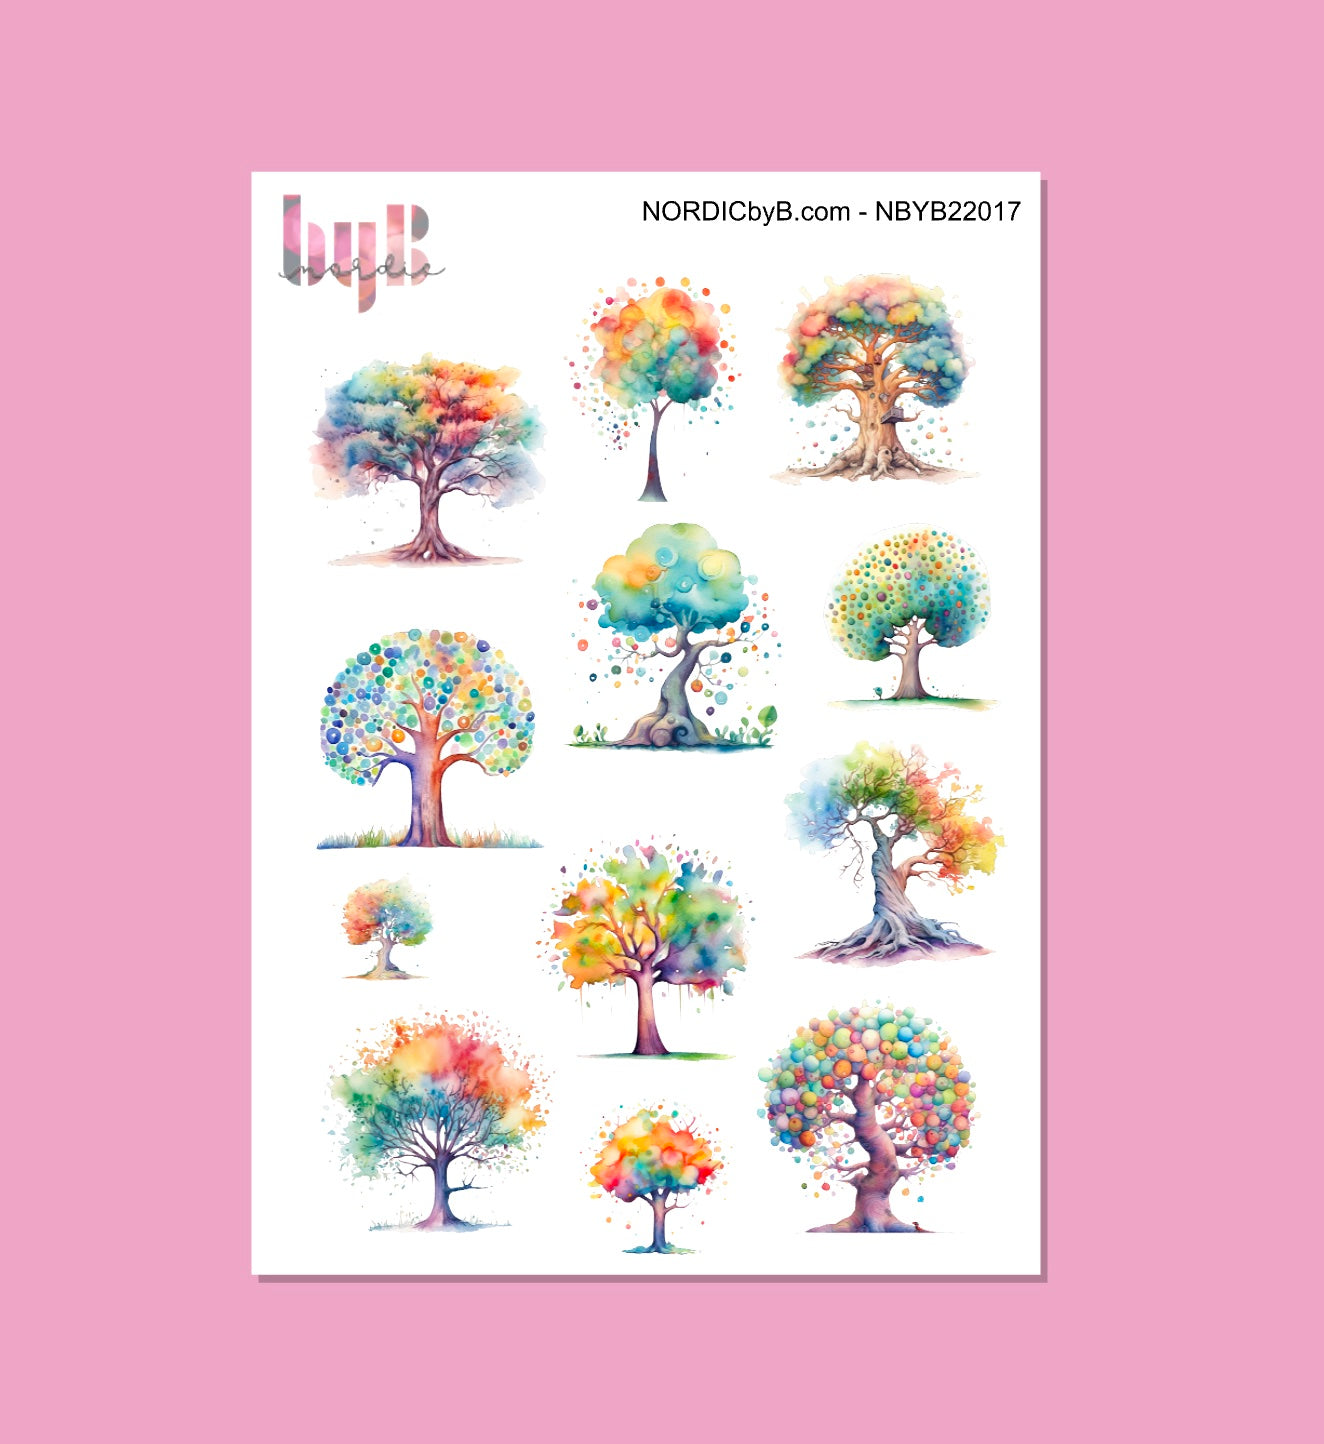 Colorful Tree Stickers - 12,5 x 17 cm - For BuJo, Decorating, Planning, Scrapbooking